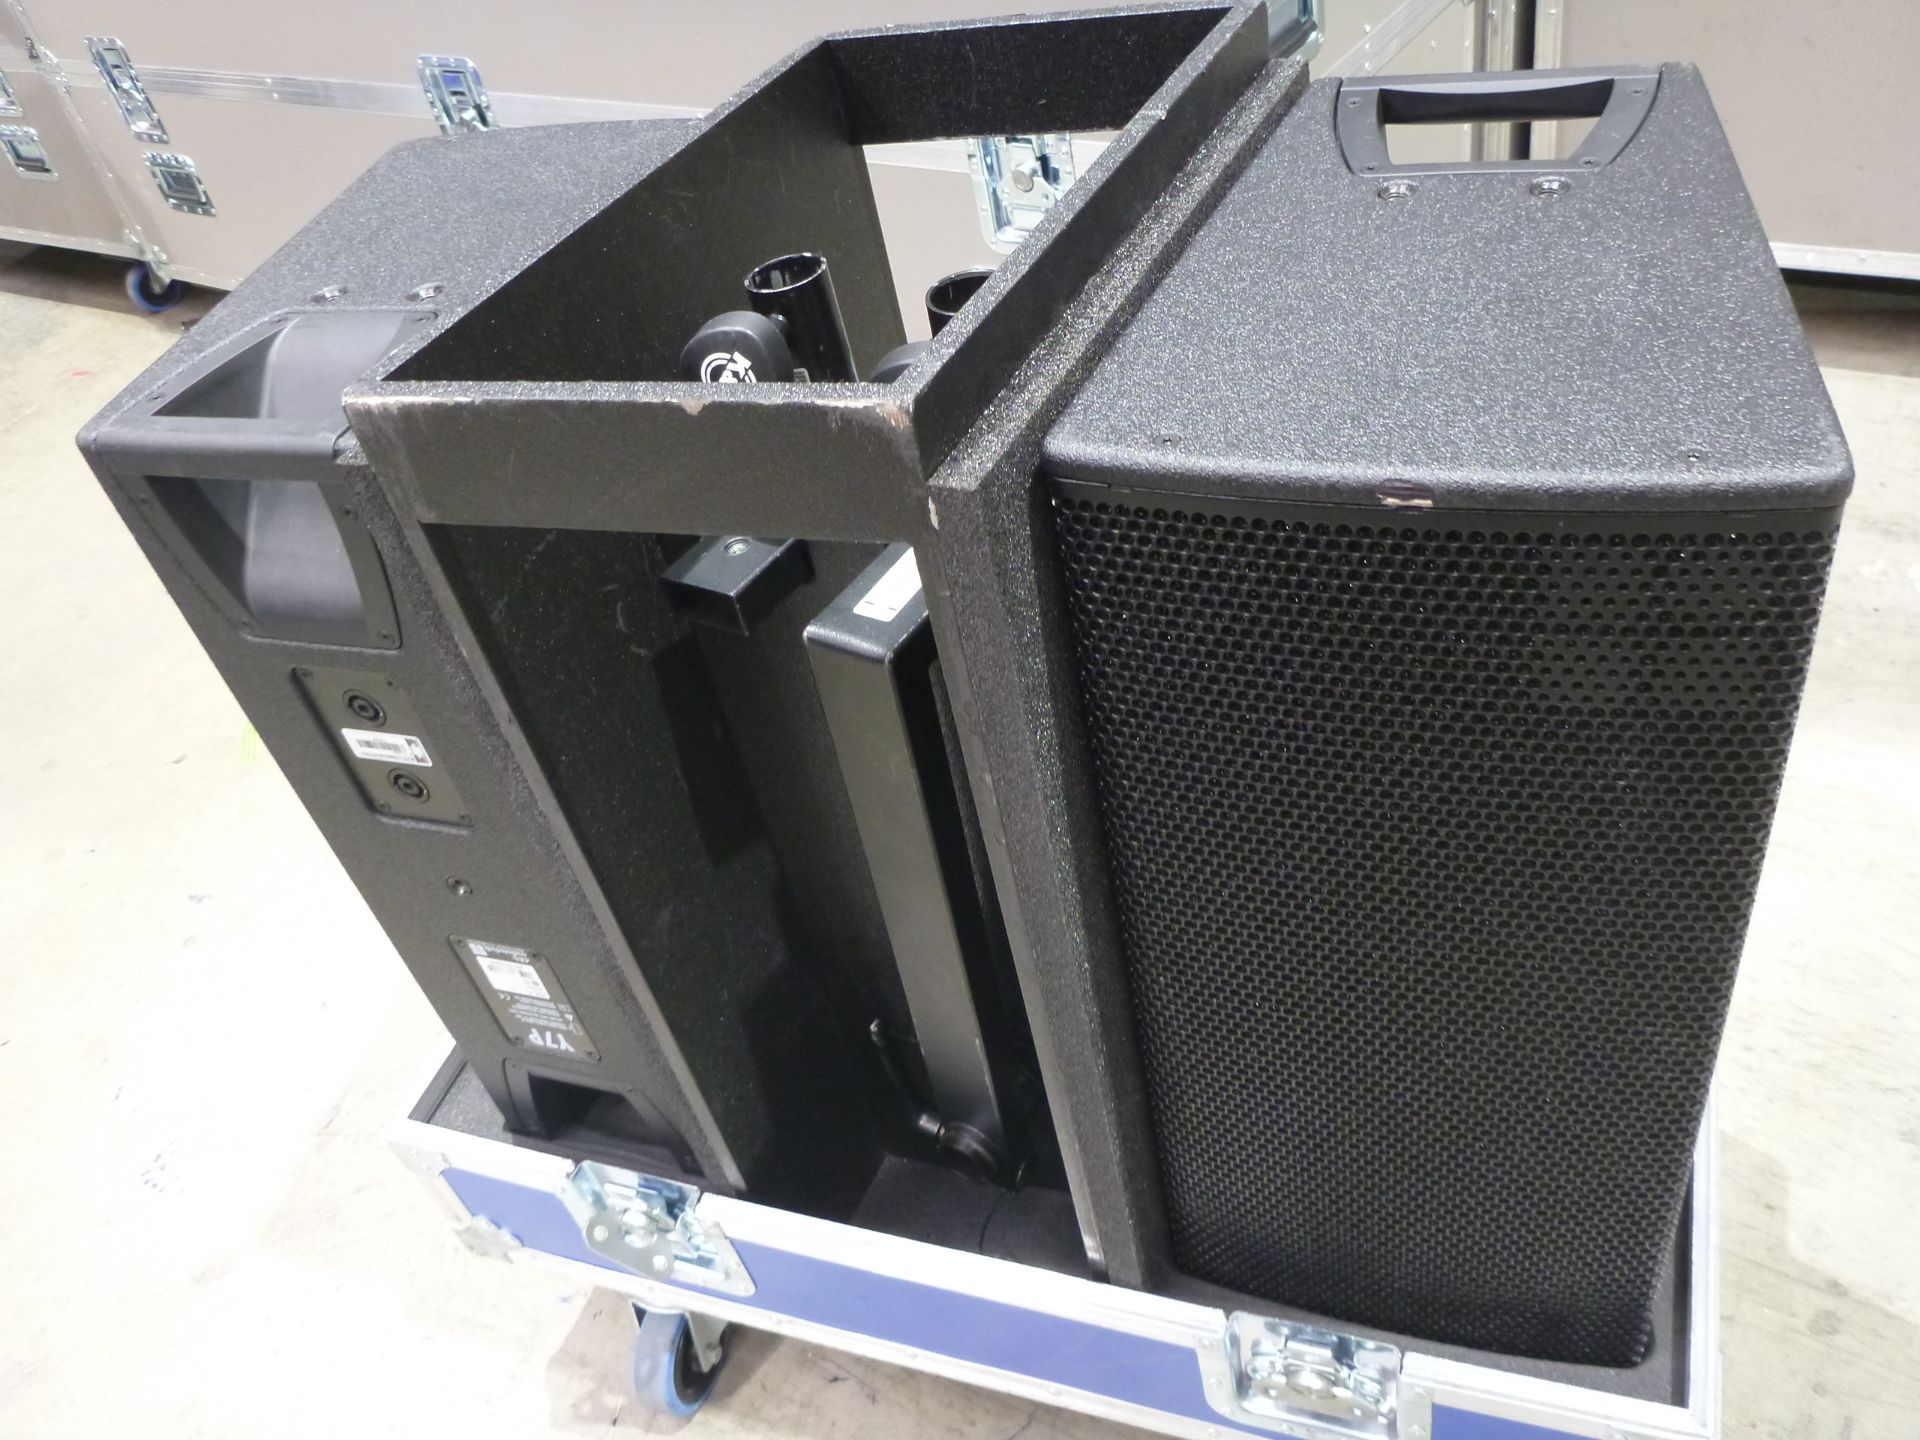 D & B Audiotecknik Y7P Loudspeakers (Pair) In flight case with flying frame, top hat and safety - Image 2 of 7